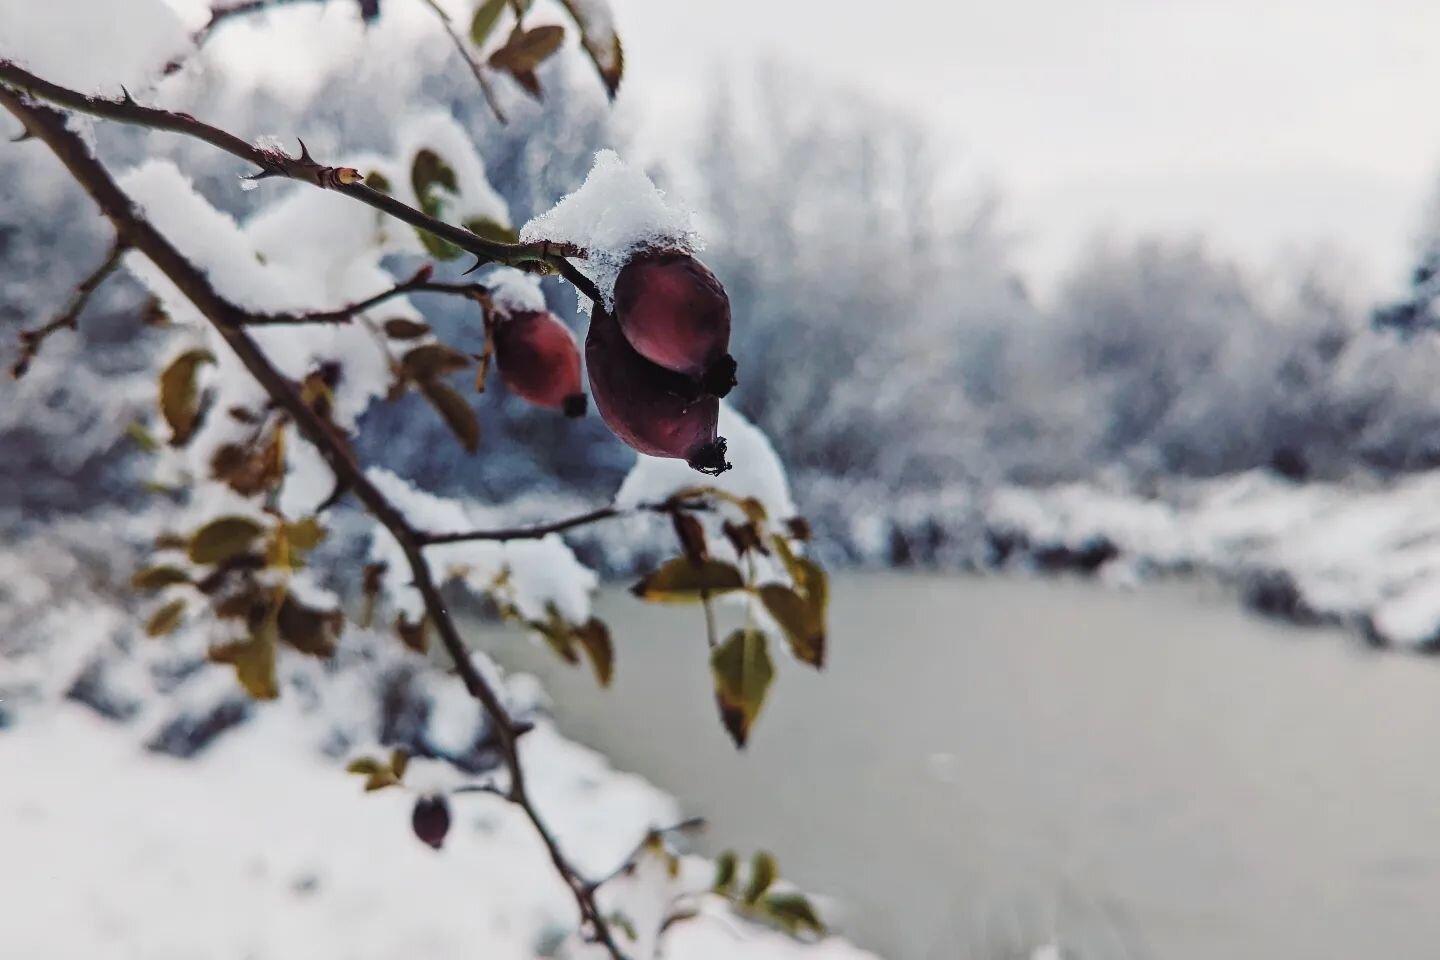 The wetland has received its first snow of the season, and it's quite the winter wonderland!